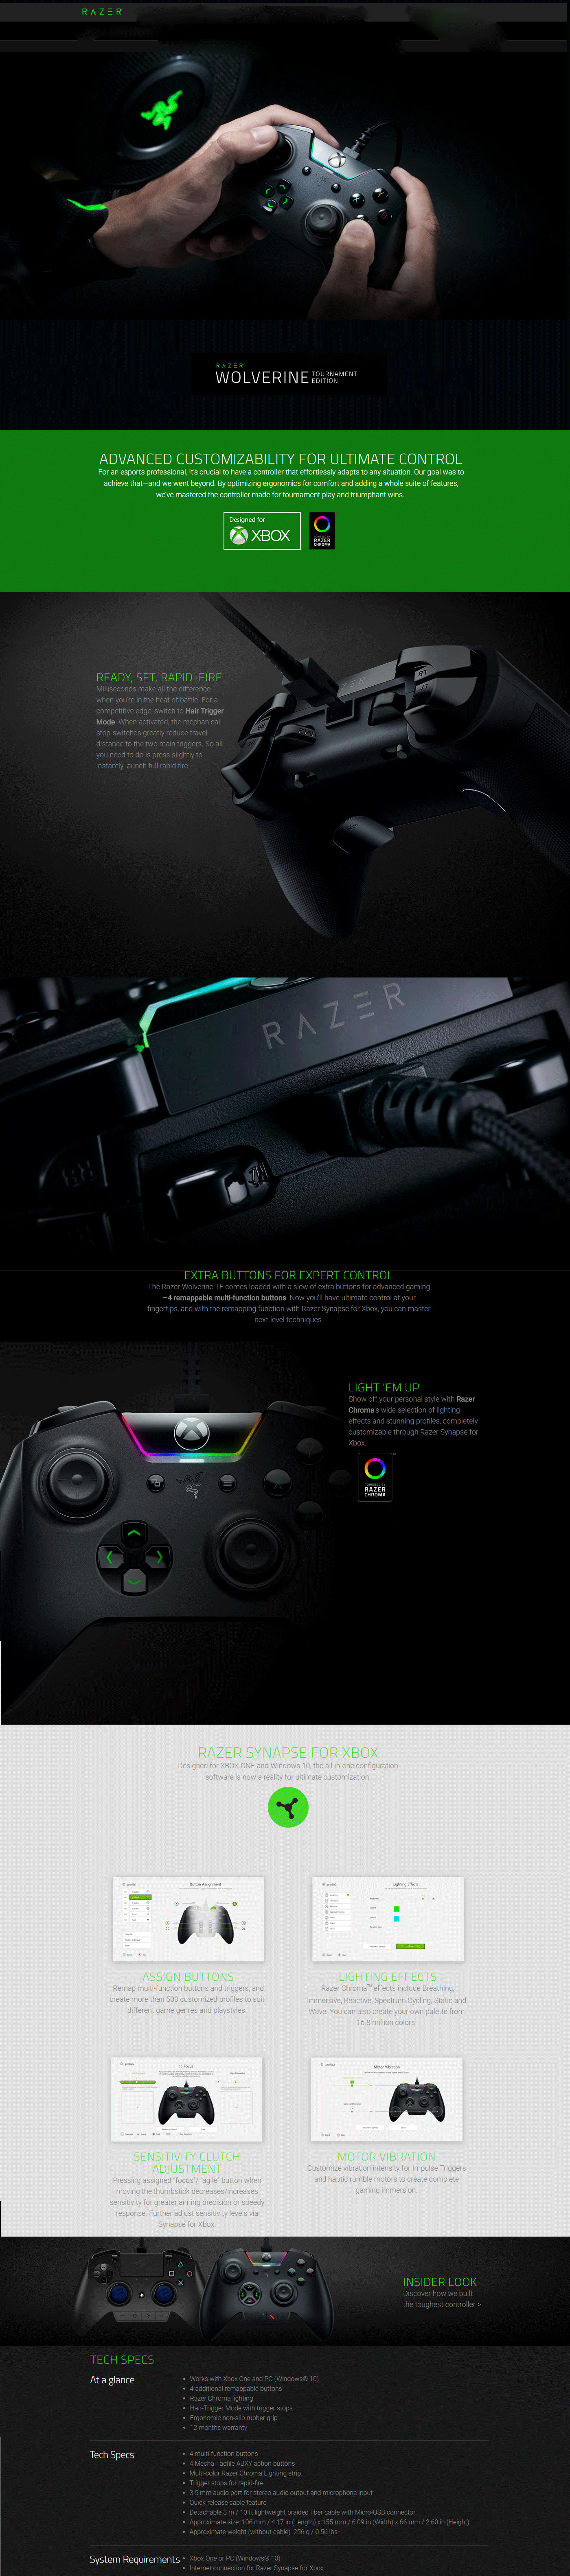  Buy Online Razer Wolverine Tournament Edition Gaming Controller for Xbox One (RZ06-01990100-R3M1)